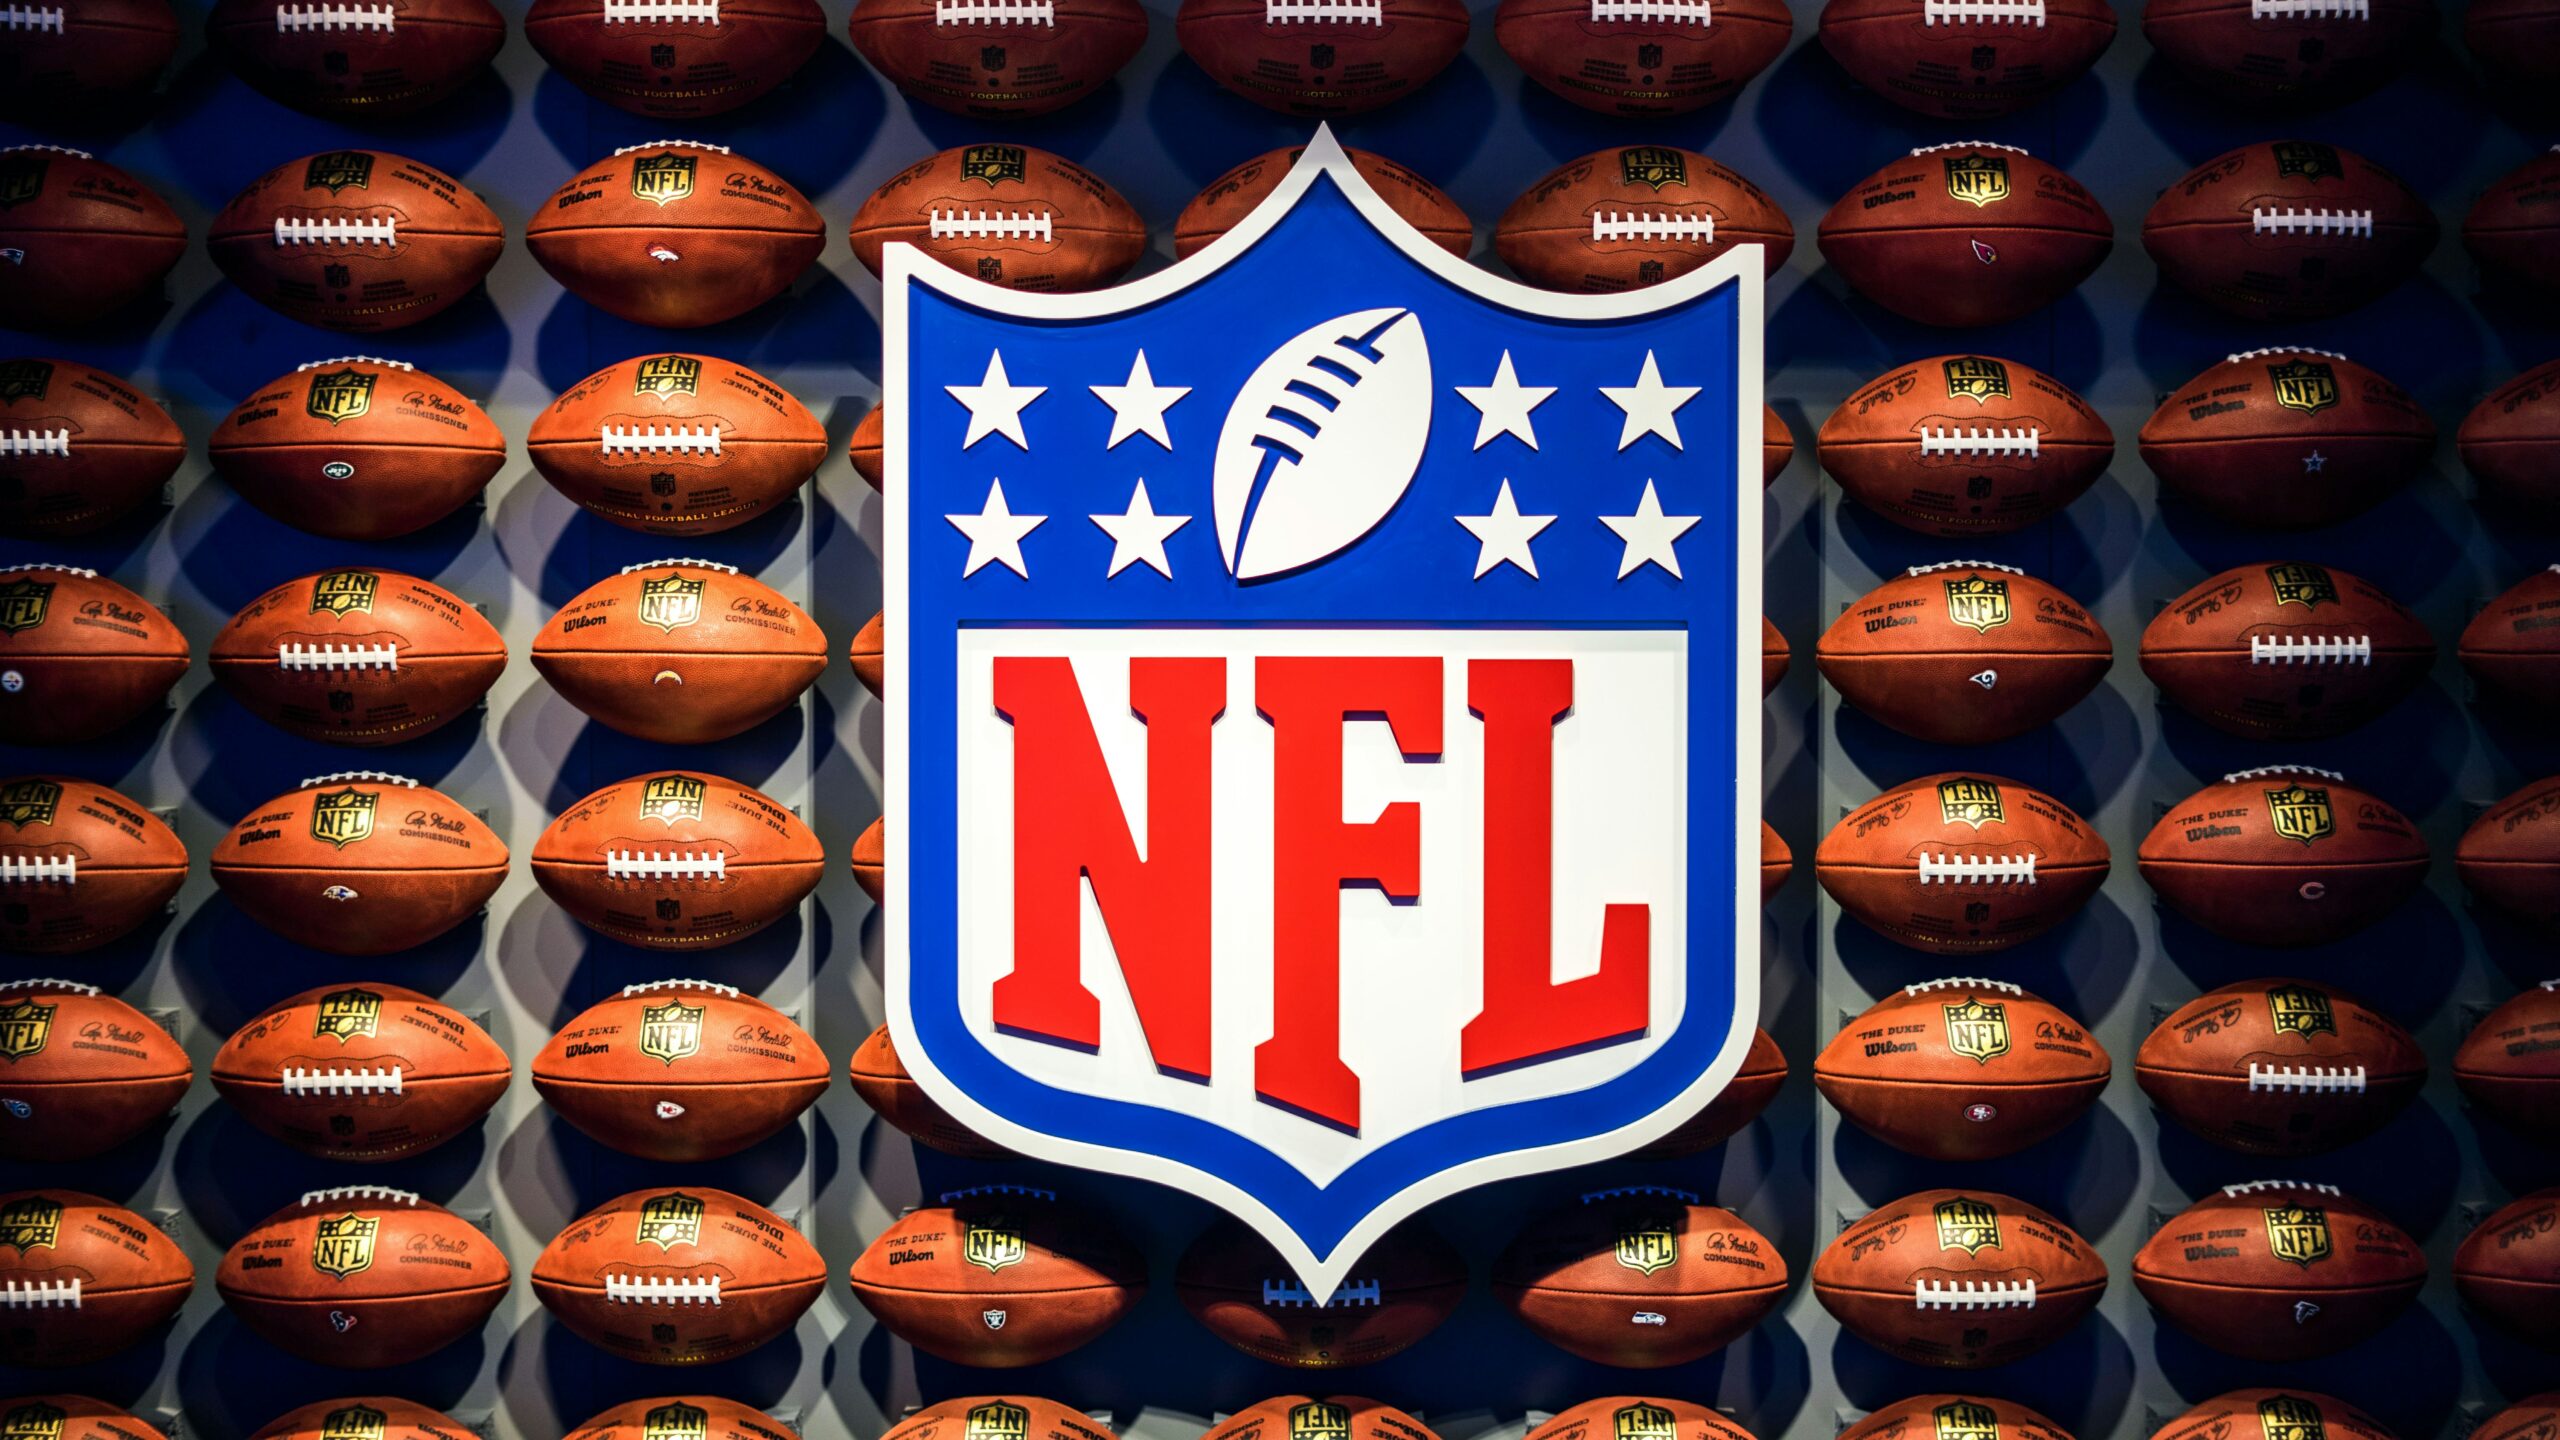 NFL sing in front of footballs